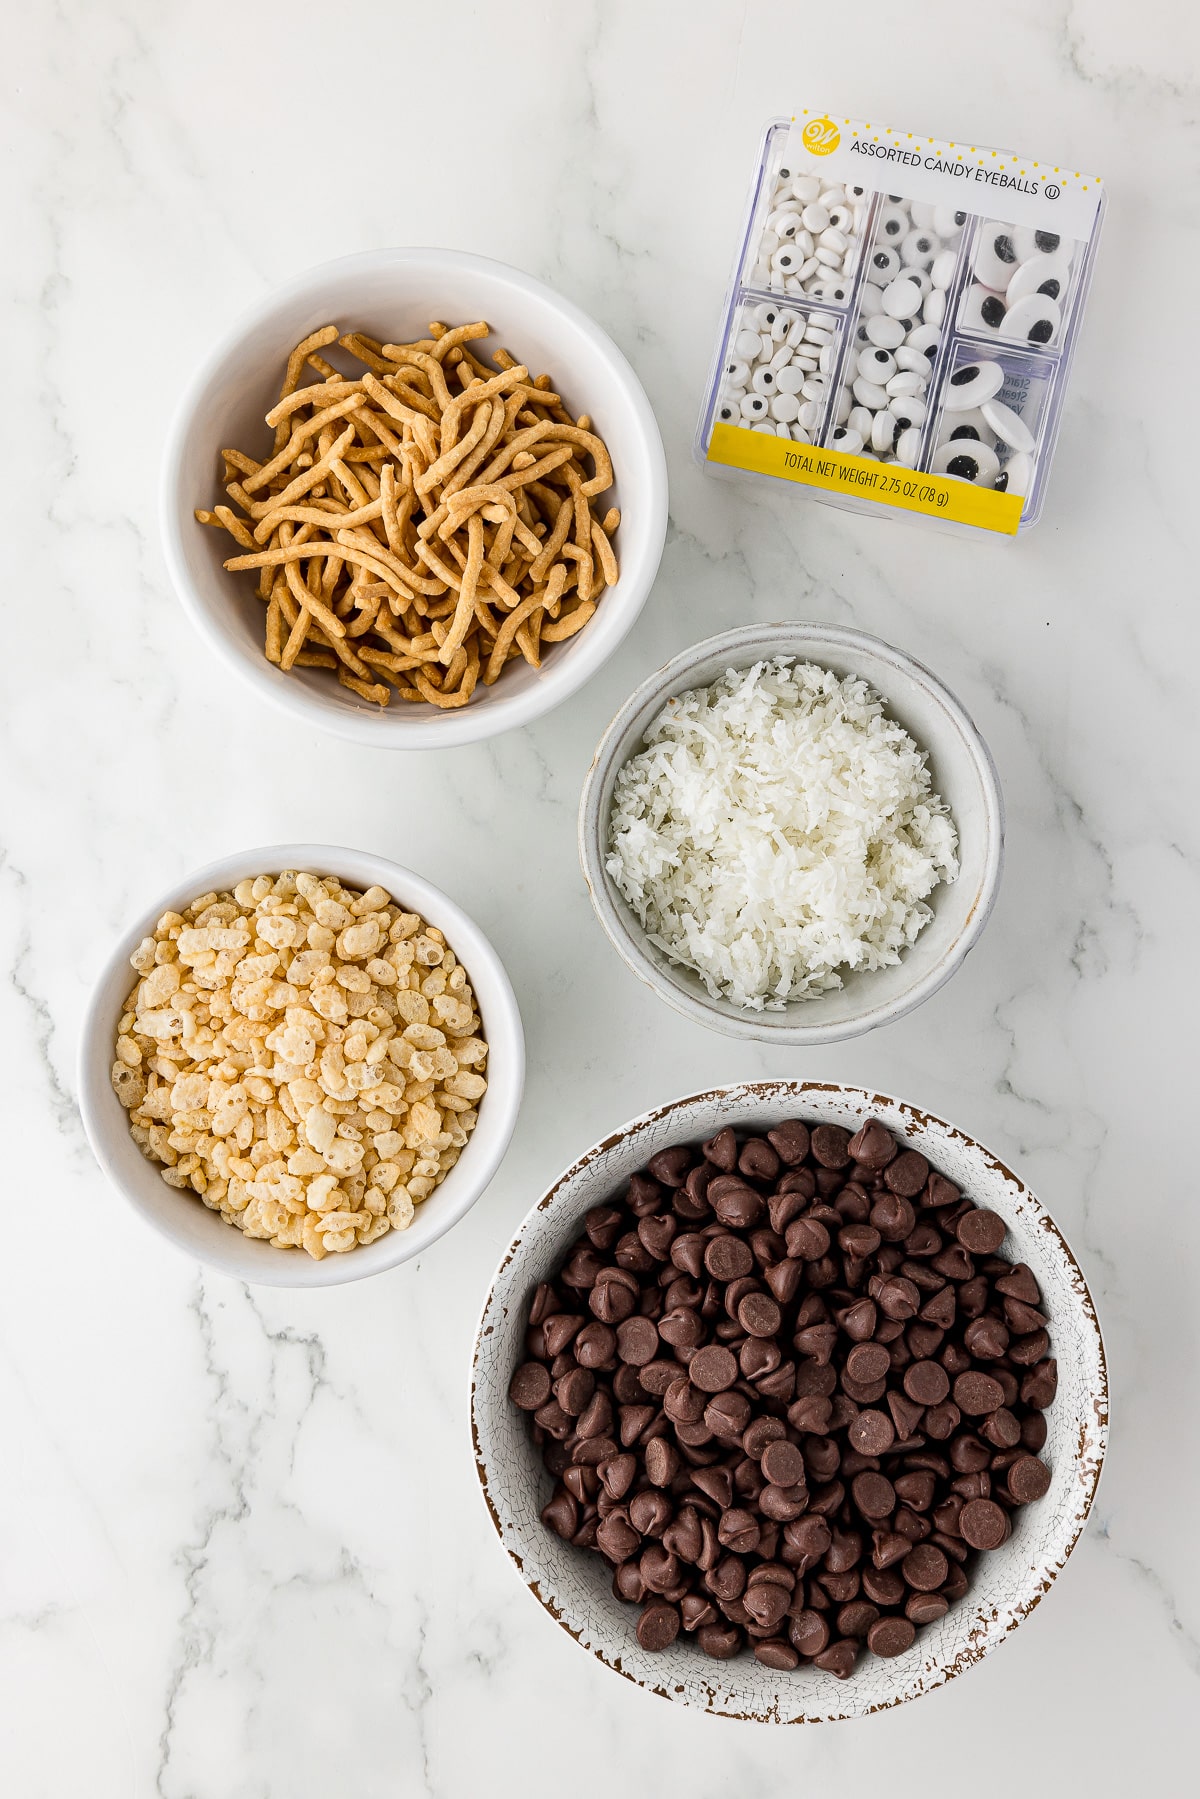 four white bowls filled with chocolate chips, rice krispie cereal, shredded coconut, chow mien noodles, and a box of wilton candy eyes